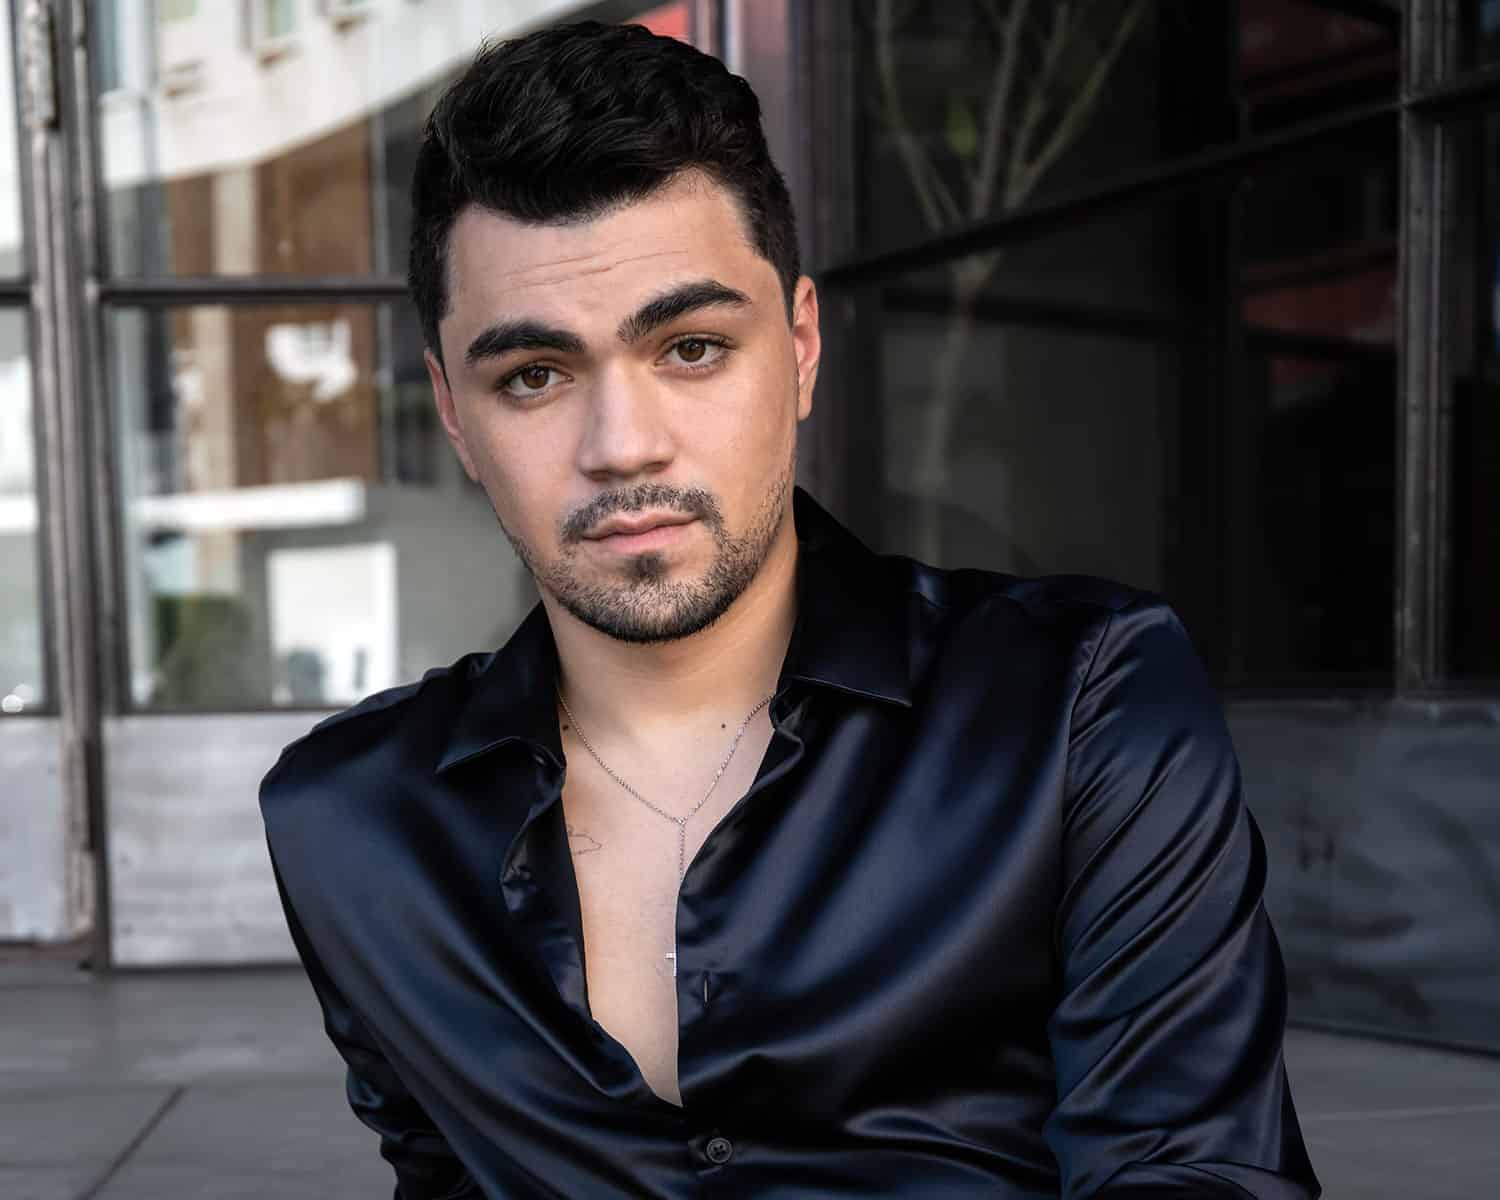 Interview: Adam Irigoyen on ‘Away’, Preparing for a Role and Self-Tape Audition Advice